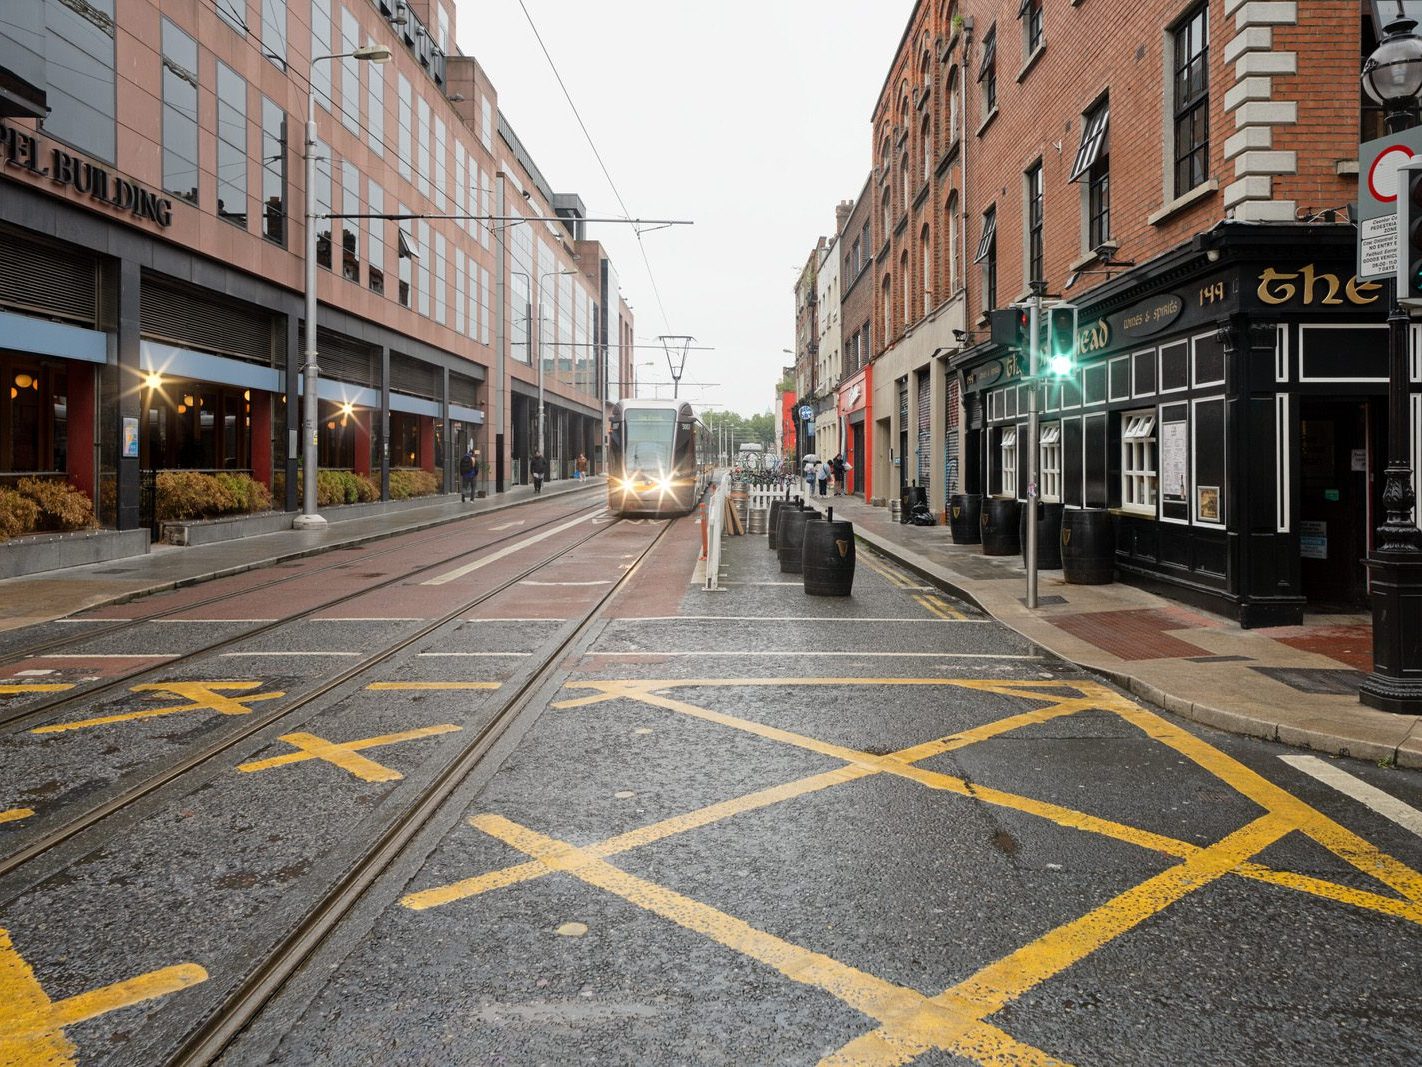 CAPEL STREET ON A DULL WET DAY [INTERIM CAPEL STREET IMPROVEMENT WORKS ARE NOW ONGOING] 025